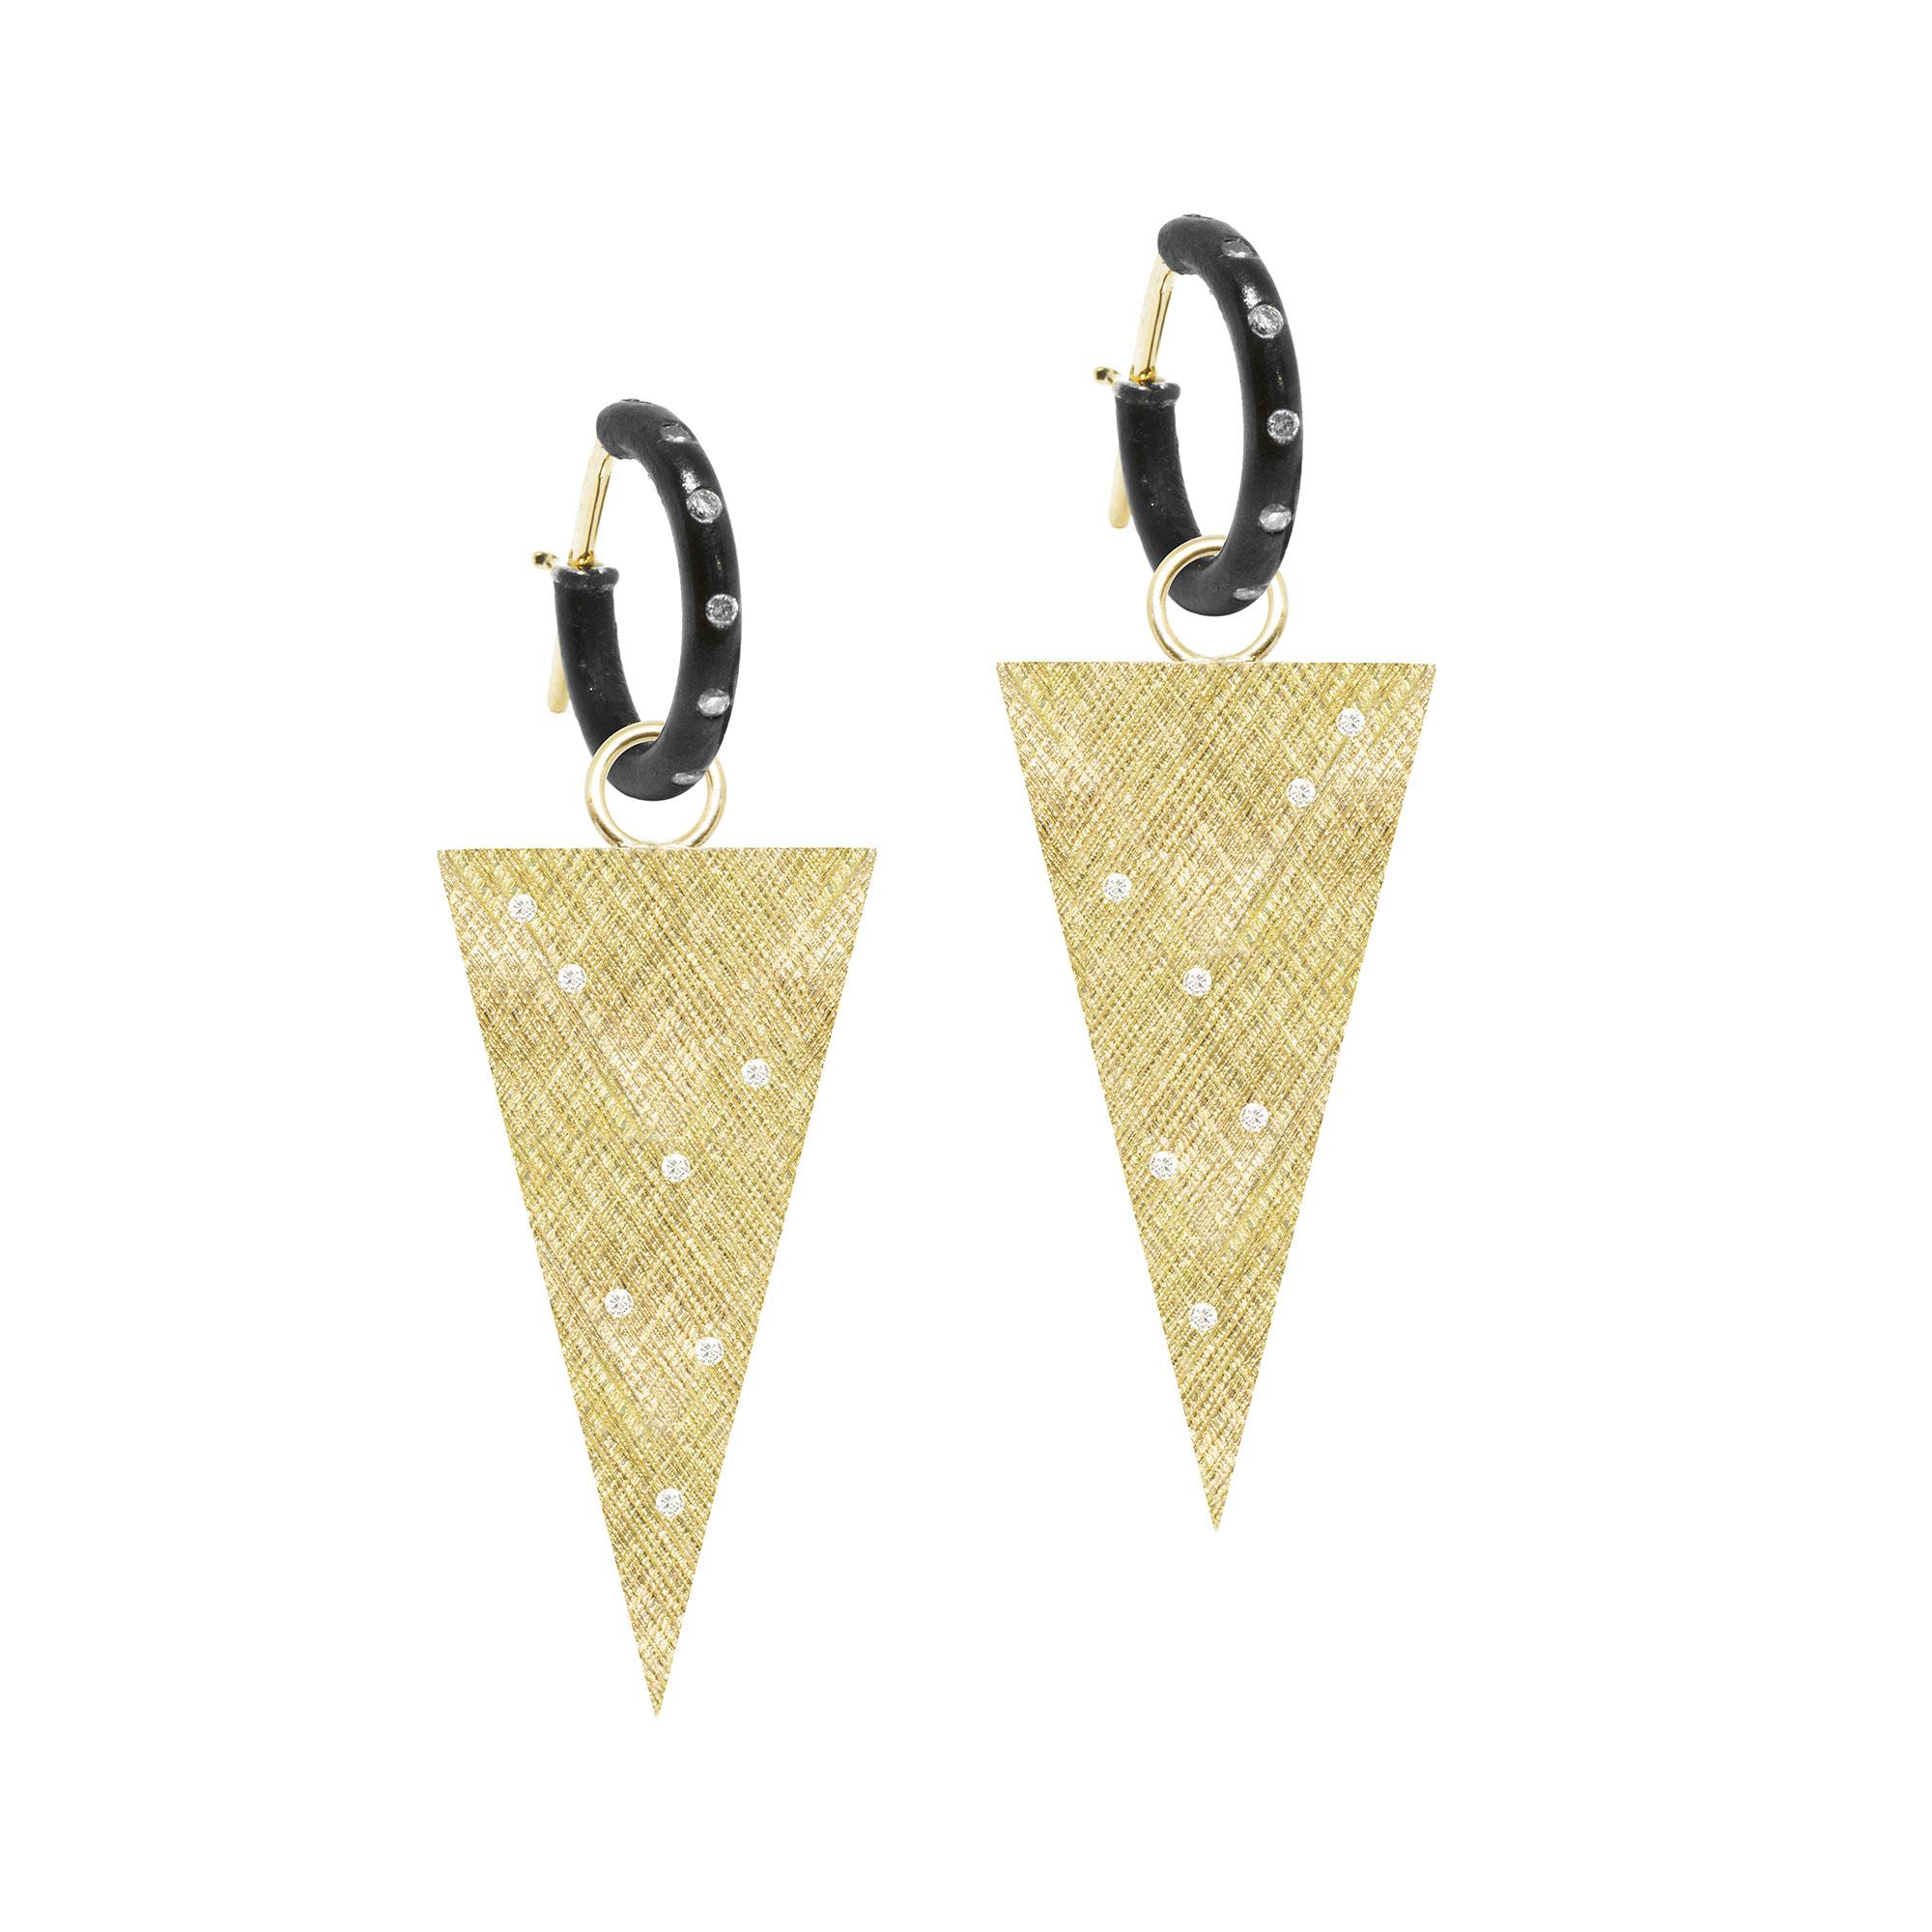 Defined by a hand-hammered crosshatch pattern, sparkling diamonds, and a cool, spiky shape, the Florentine Triangle 15x30mm Gold Charms add gorgeous shimmer and texture—and a little edge—to your look. And when you mix and match with our other